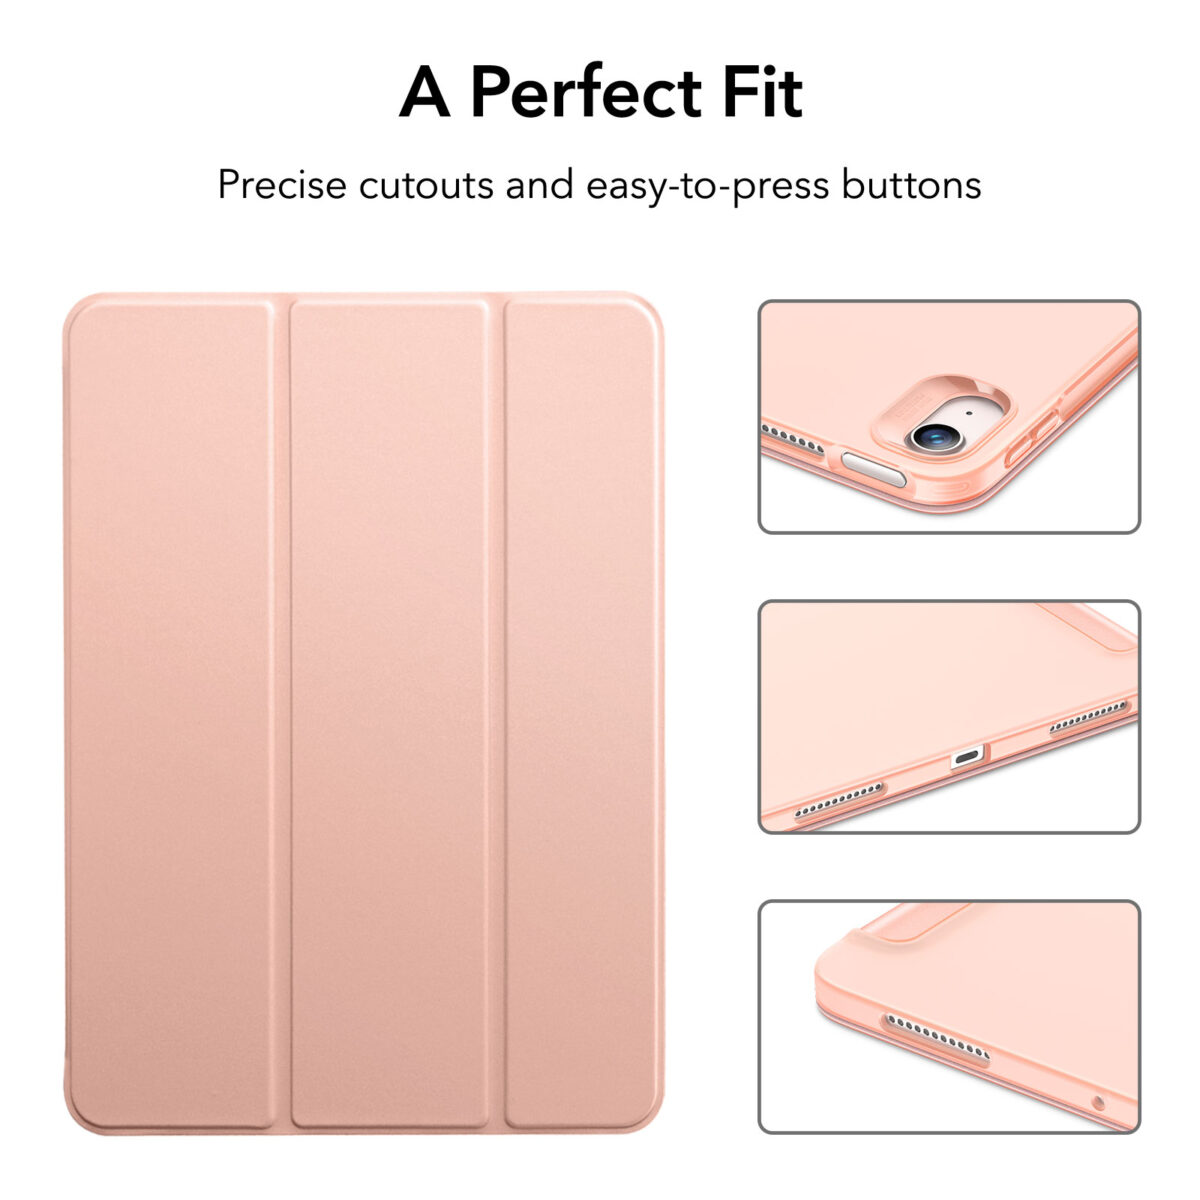 Complete package of ESR Rebound Slim Case for iPad Air 10.9 inch, available in Bangladesh